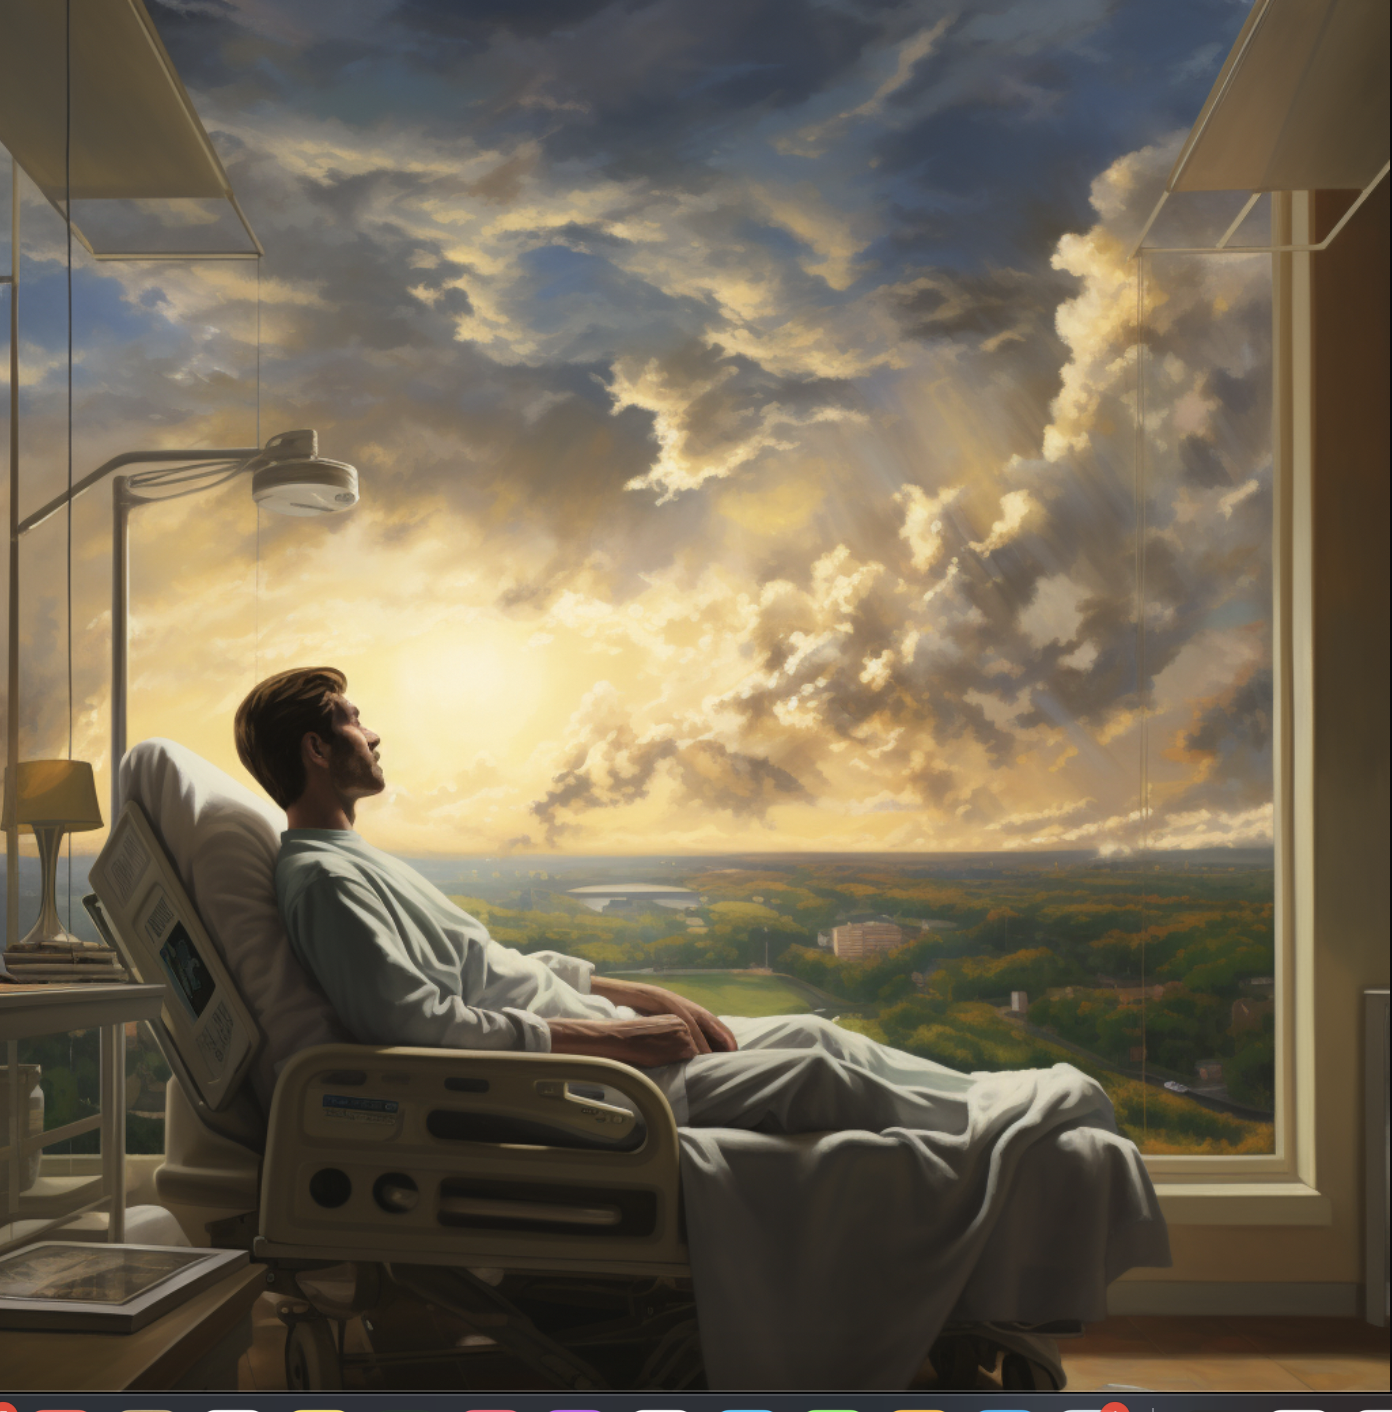 Man sitting in hospital bed looking at a beautiful sky scene